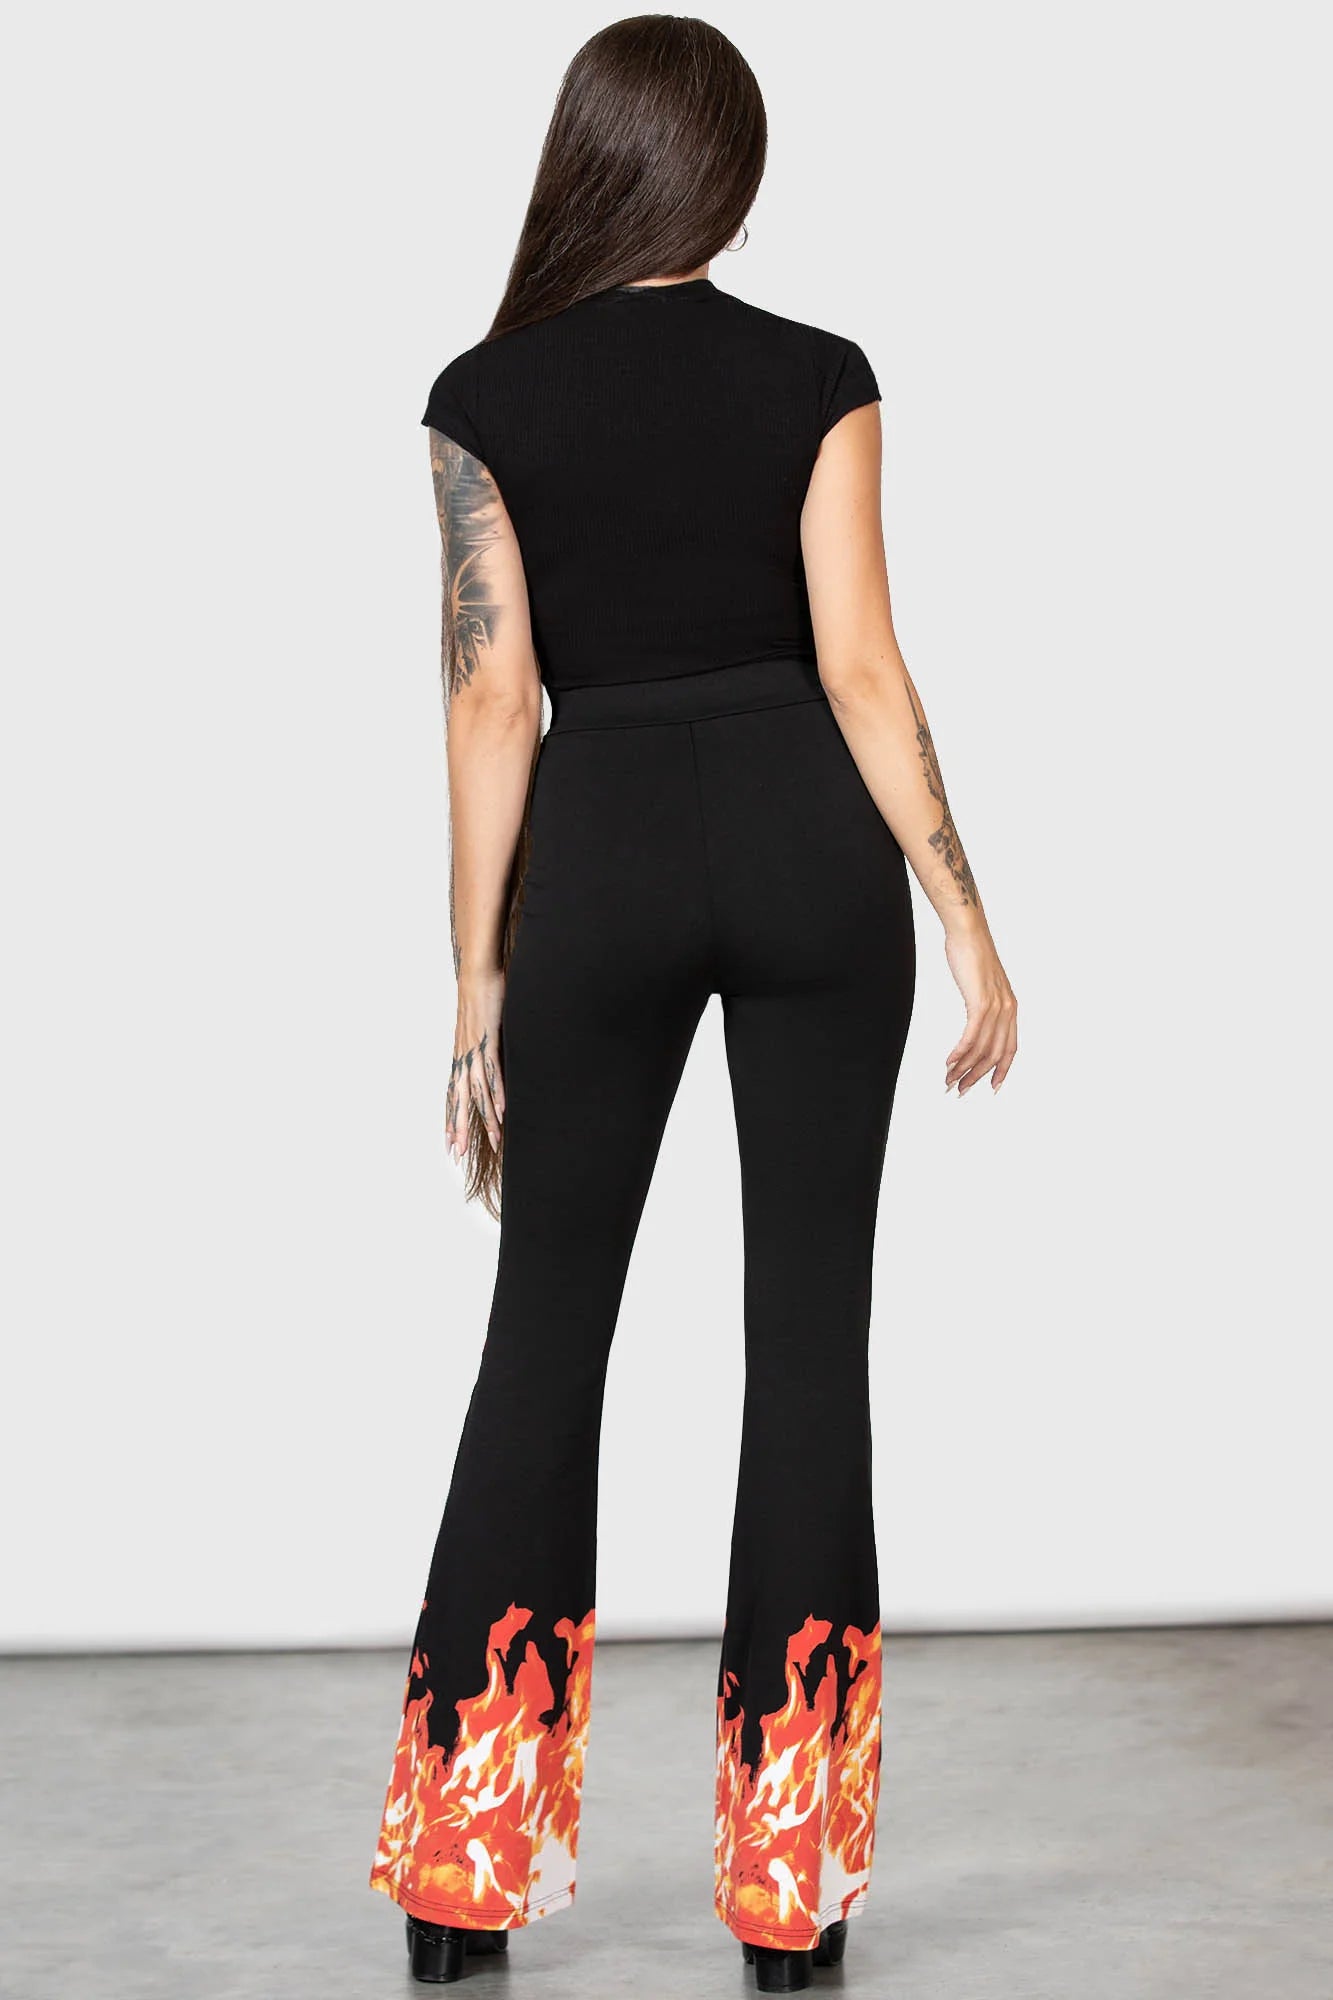 Buy Formal Bootleg Trousers | Fast Home Delivery | Bonmarché